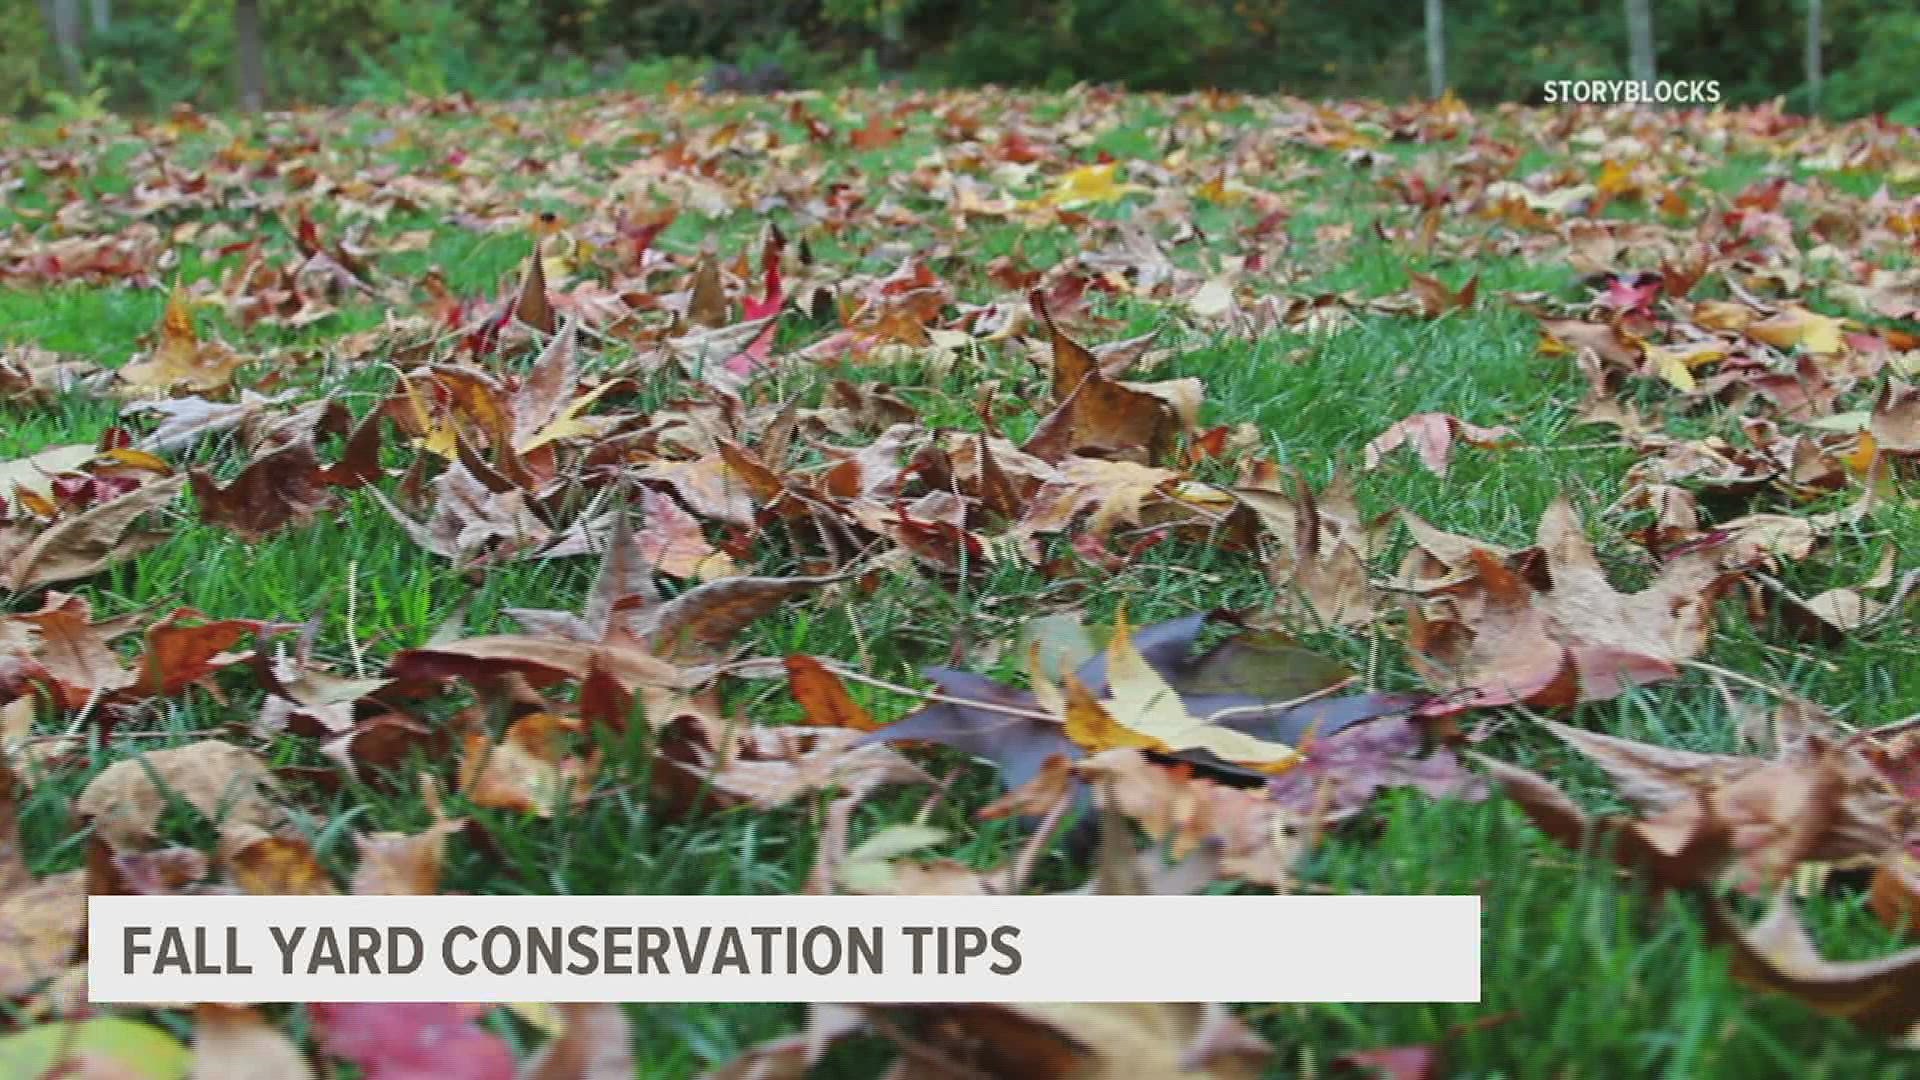 You don't have to rake the leaves this year! In fact, it's better for your turf and local ecosystem to let the leaves sit.